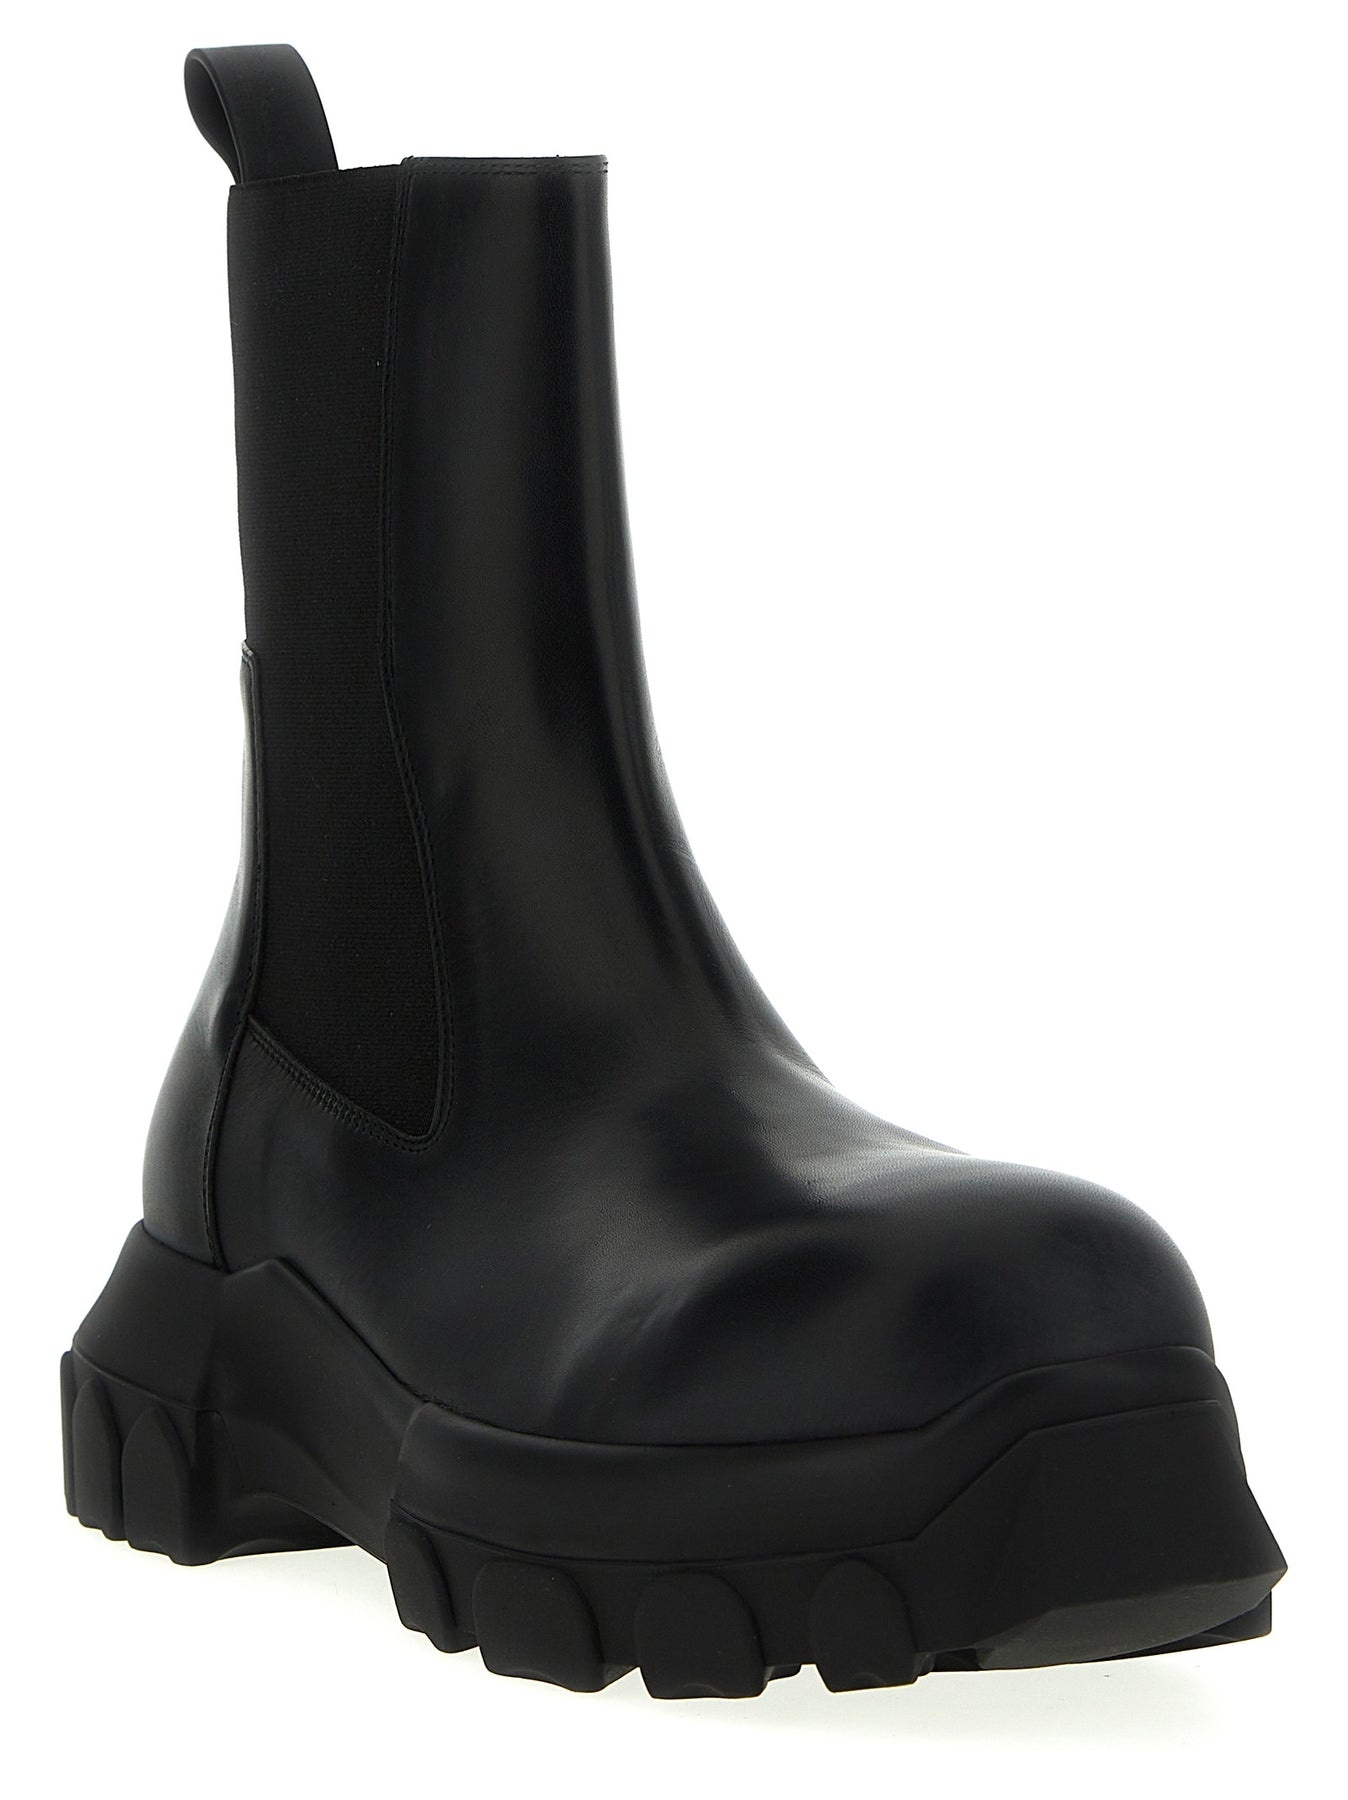 Beatle Bozo Tractor Boots, Ankle Boots Black - 2